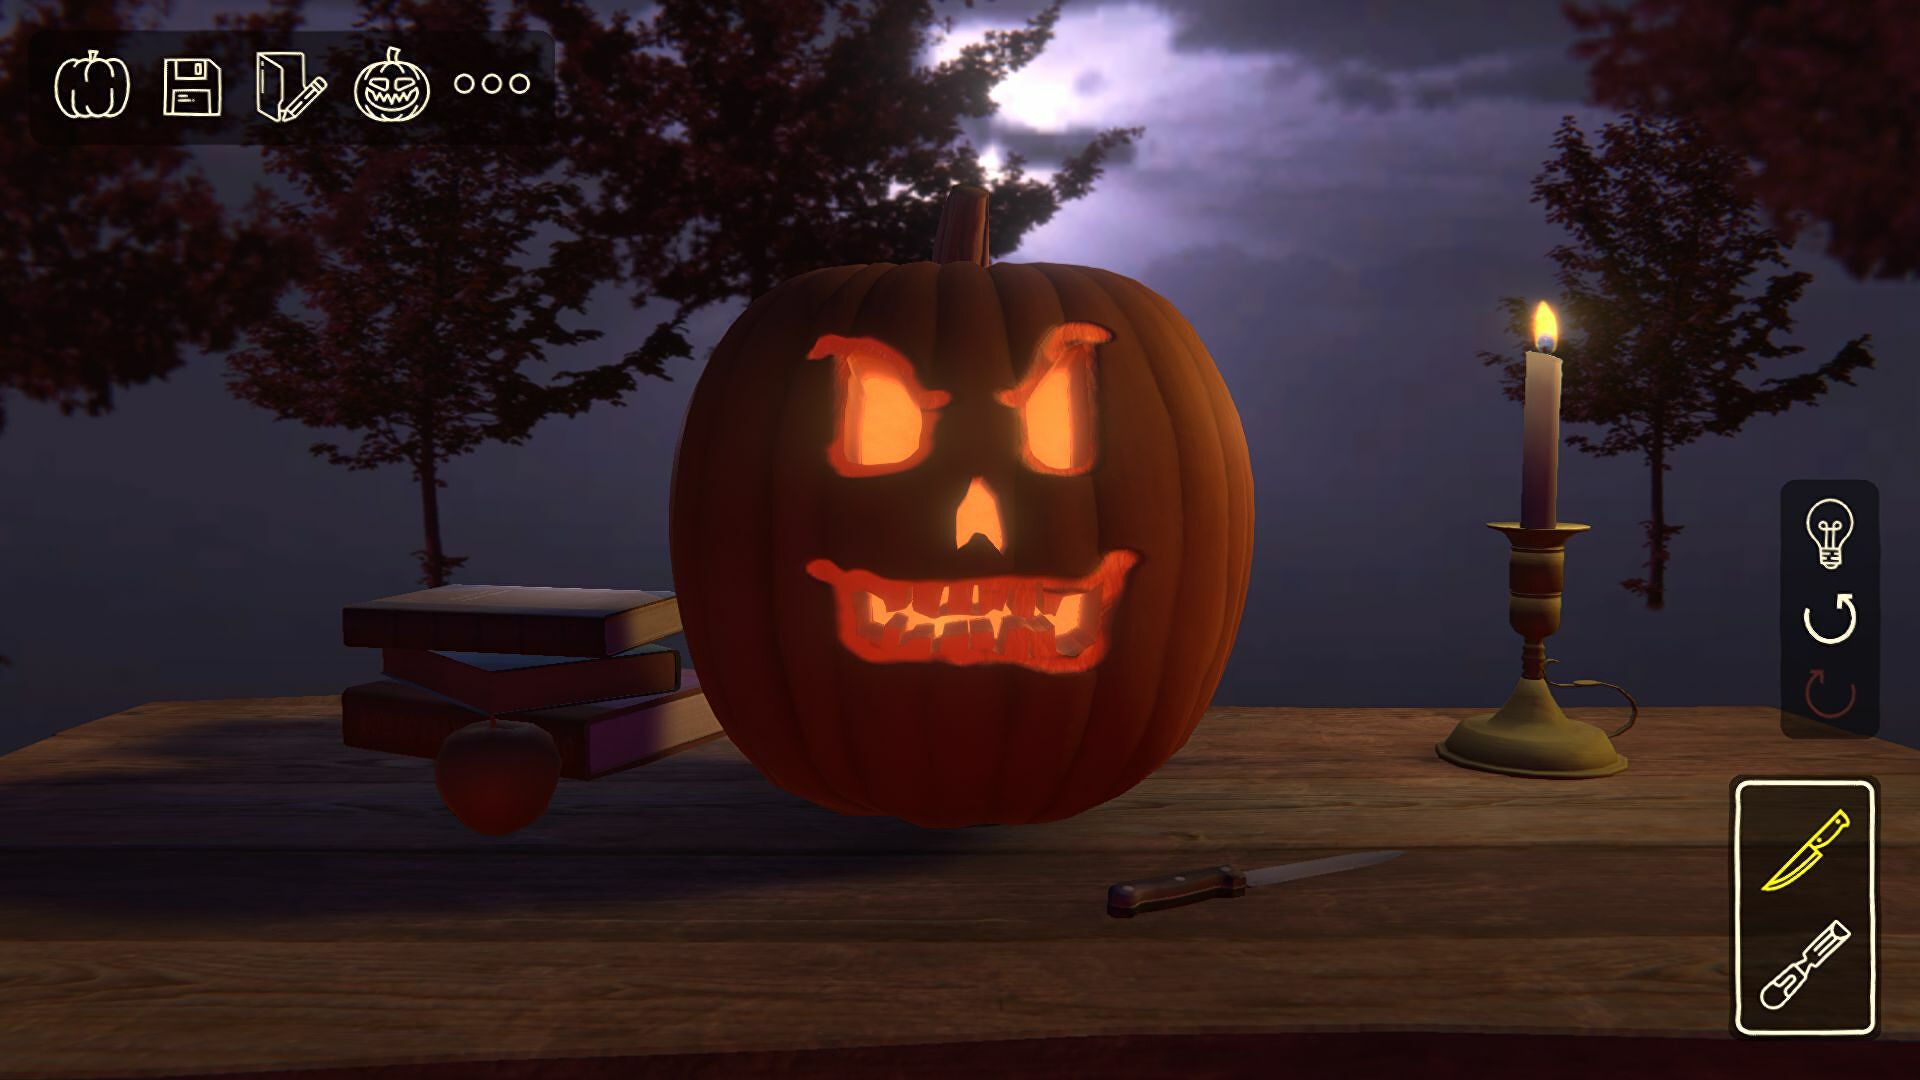 October means the video game pumpkins are back, baby!